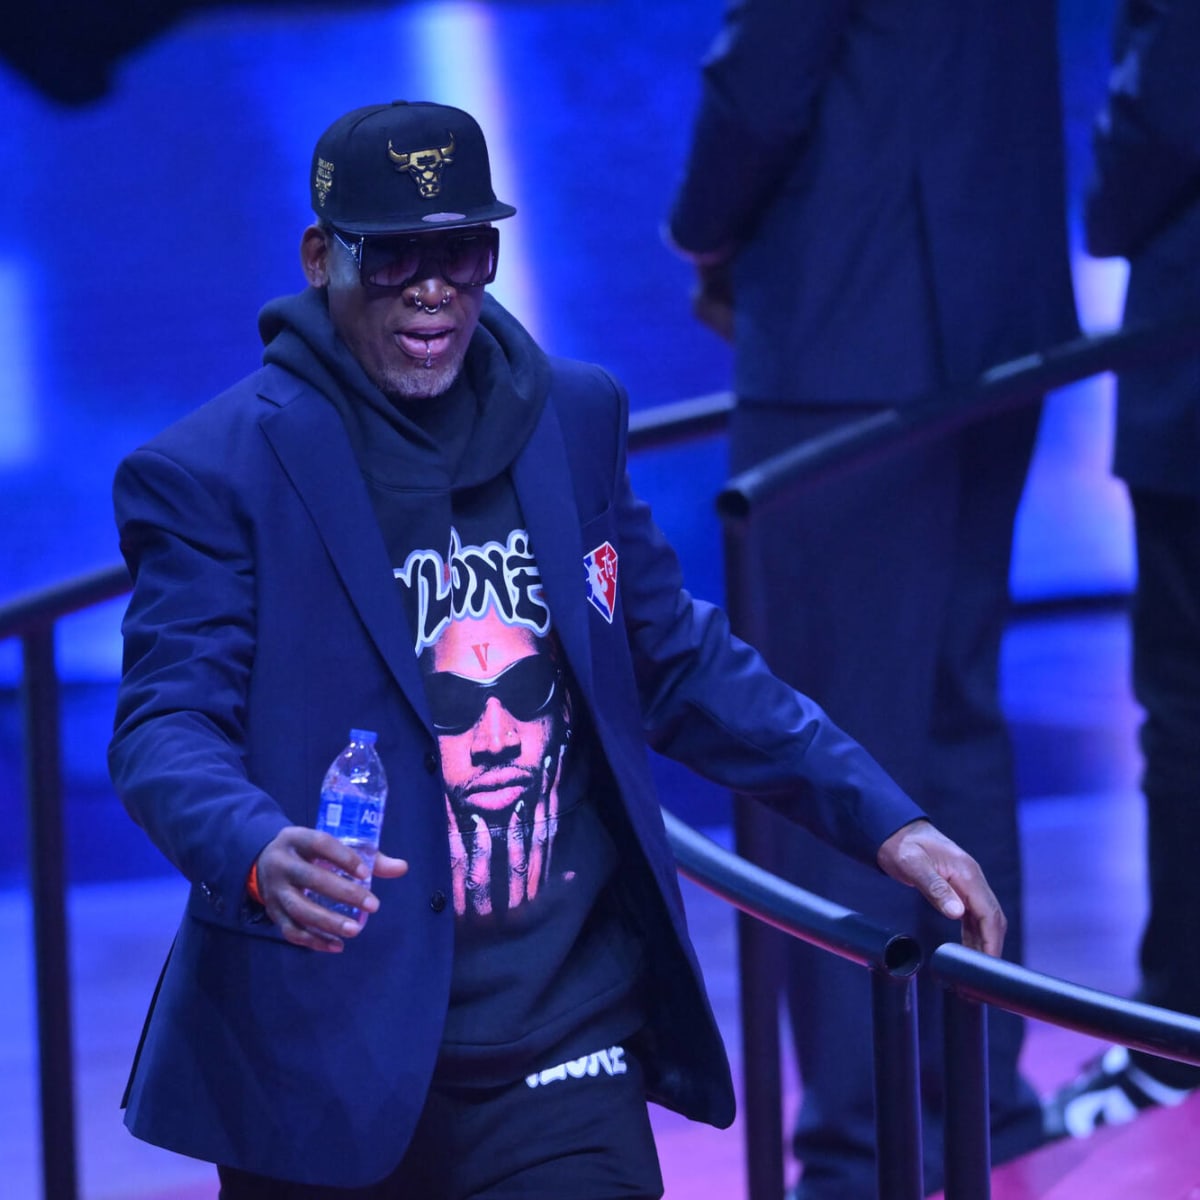 Dennis Rodman Says LeBron James Has 'No Moves,' Game Is 'Too Simple